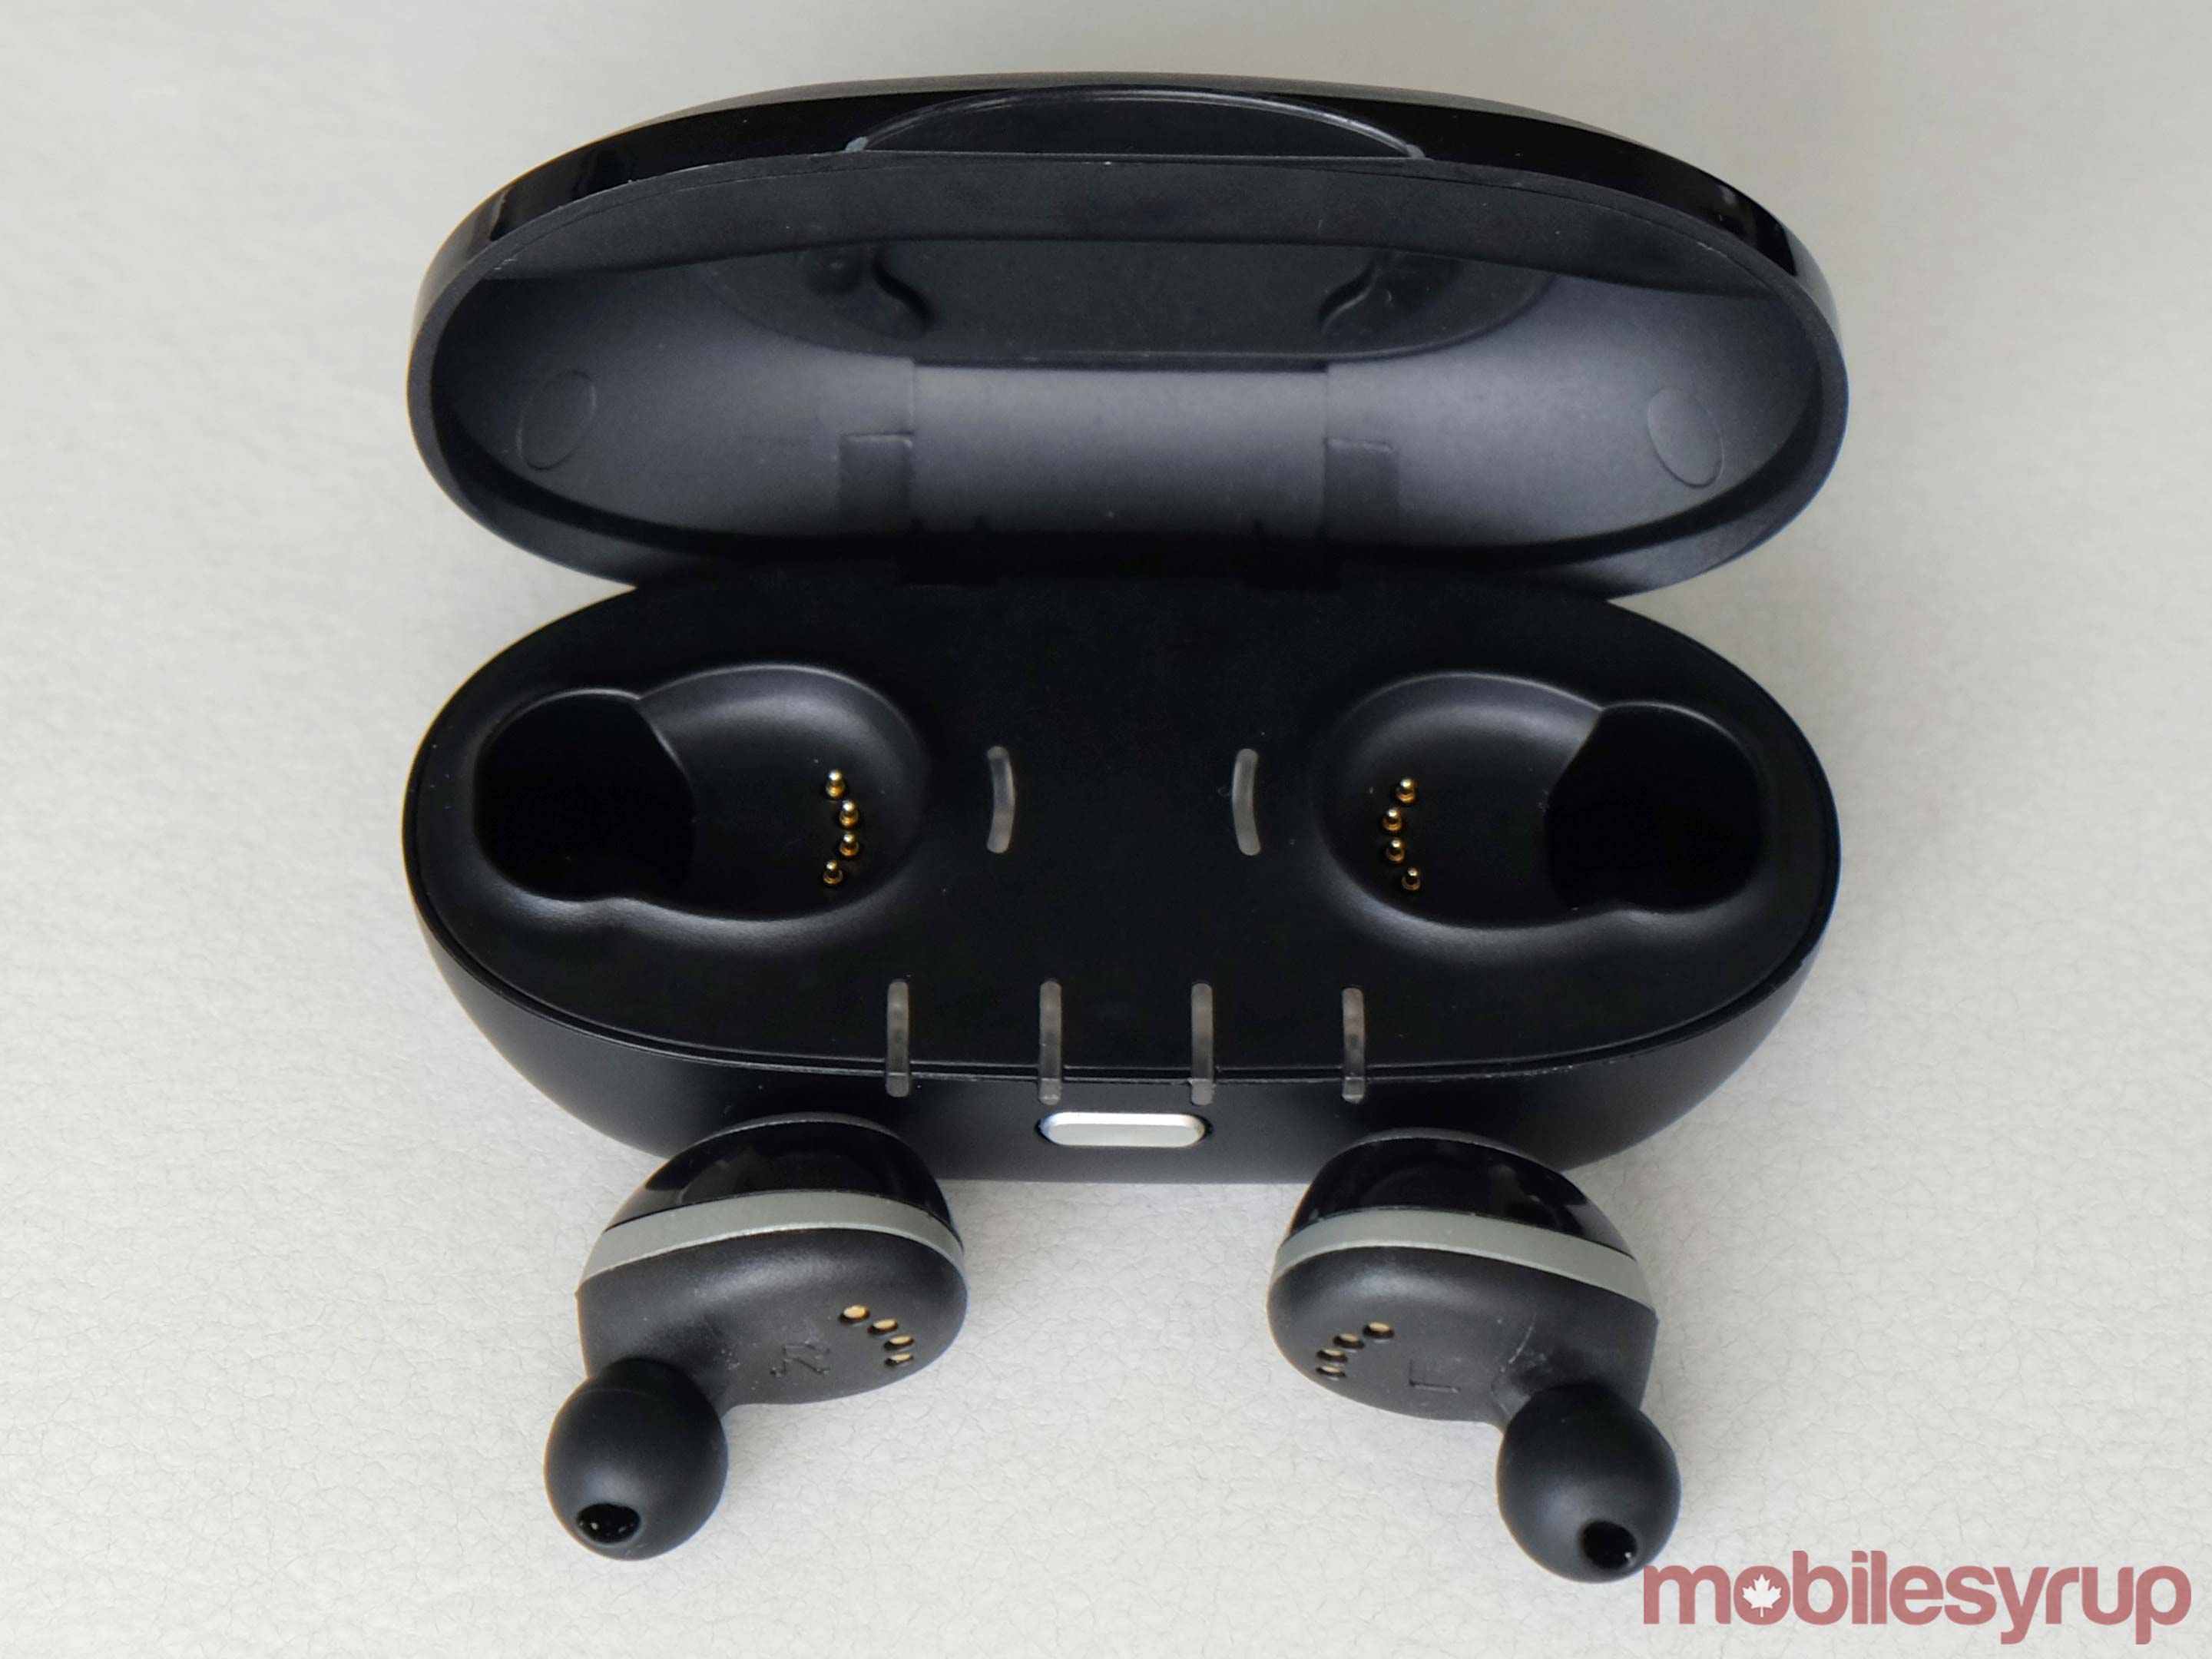 IQBuds beside case